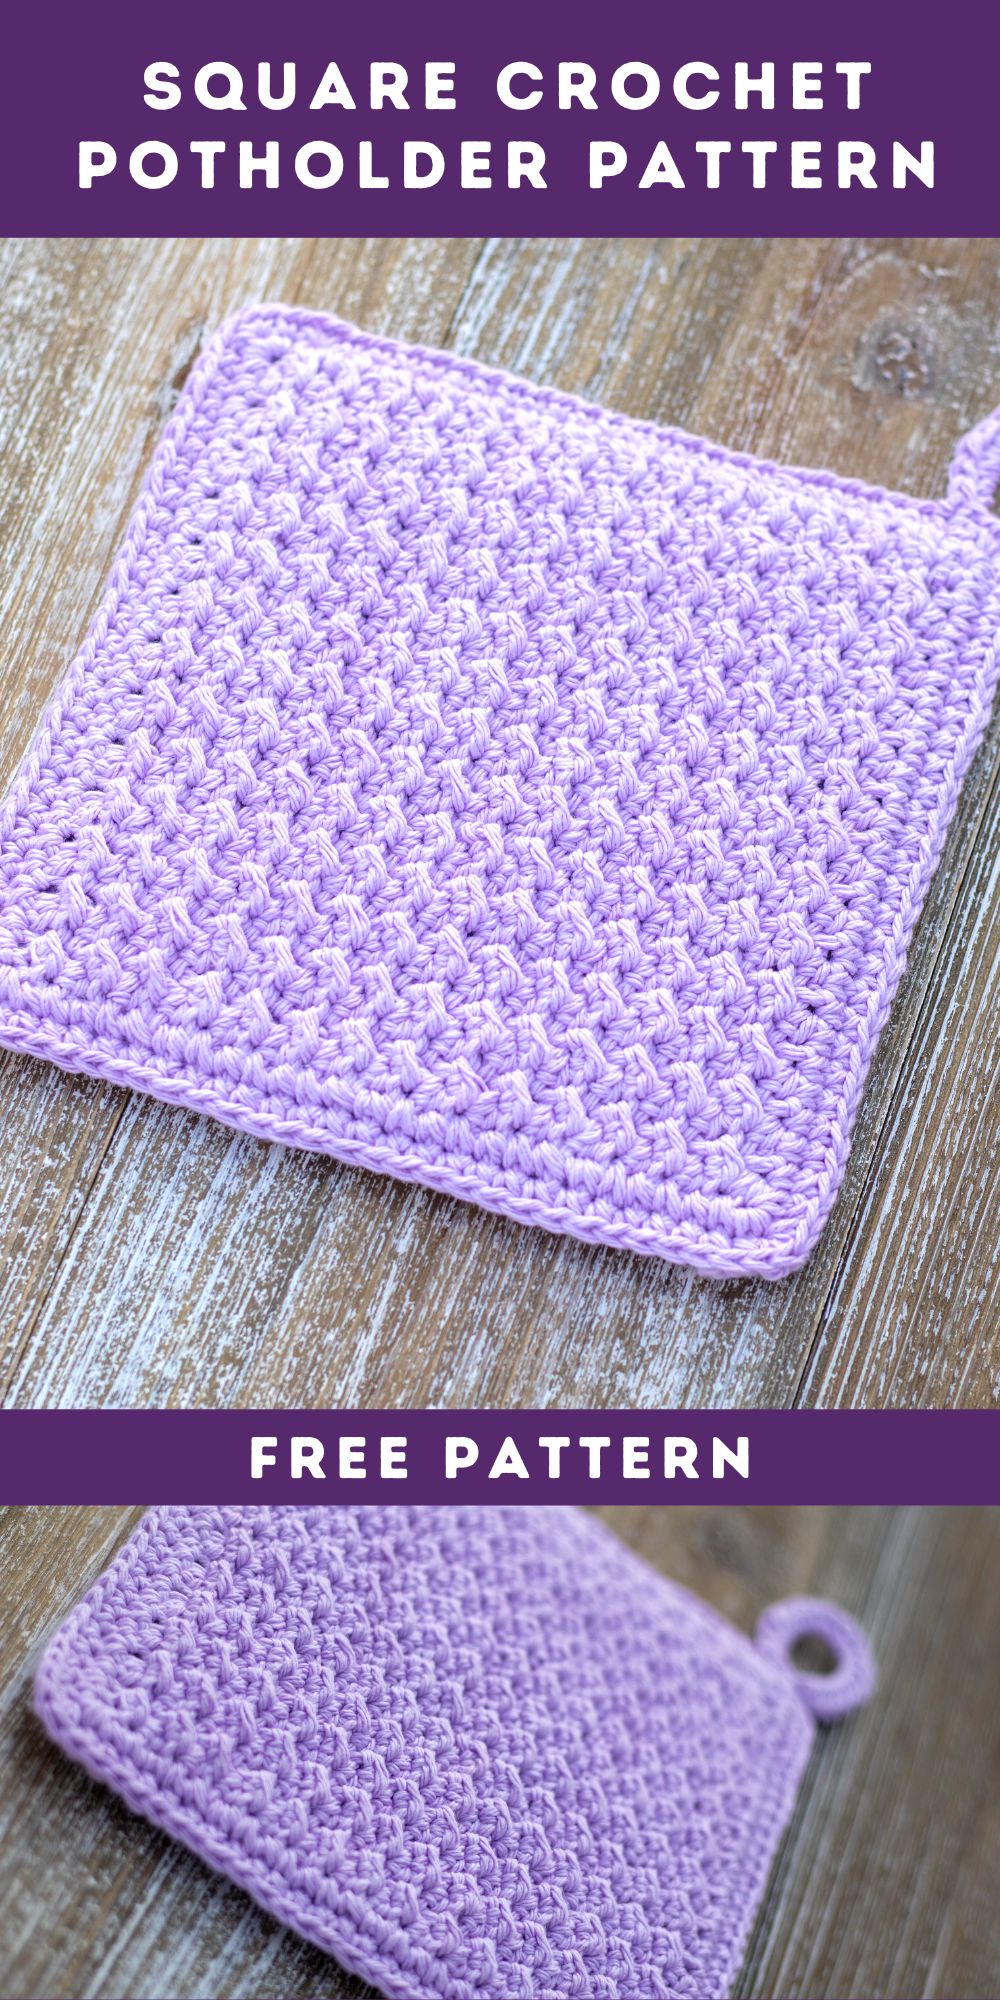 Square Potholder Crochet Pattern: Using The Even Moss Stitch - First ...